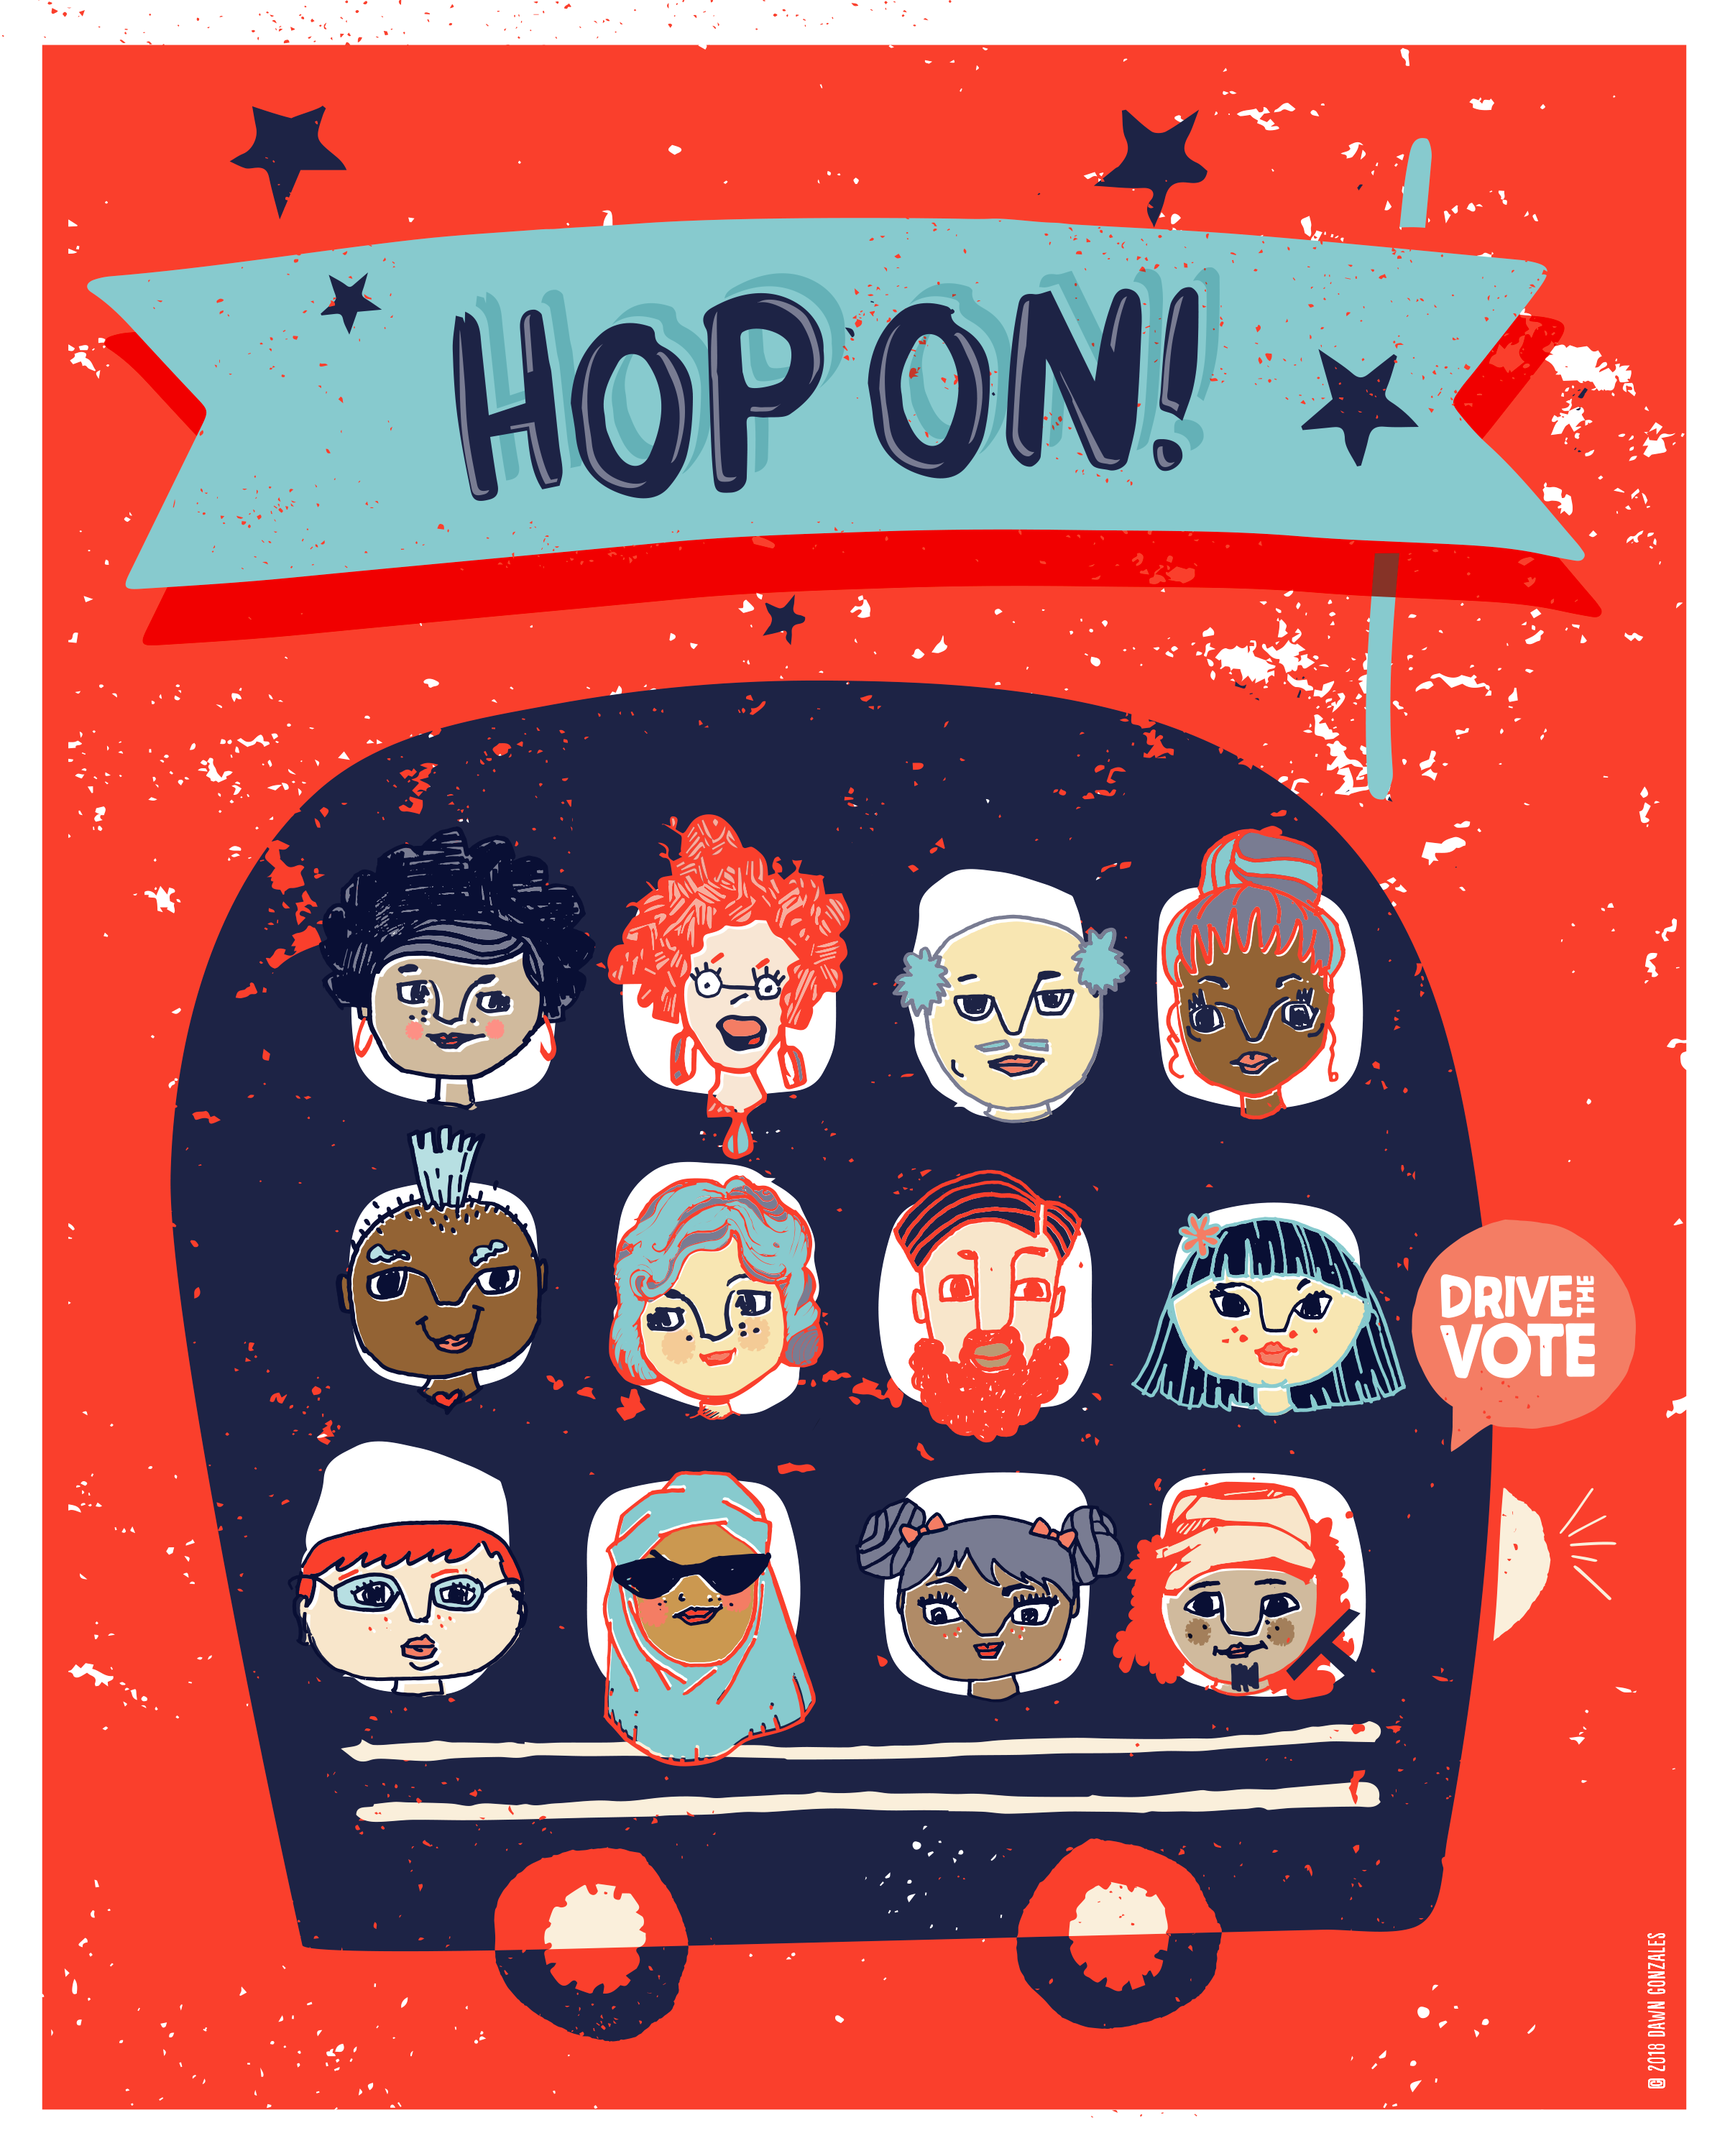 Hop On the Voting Bus!, 2018